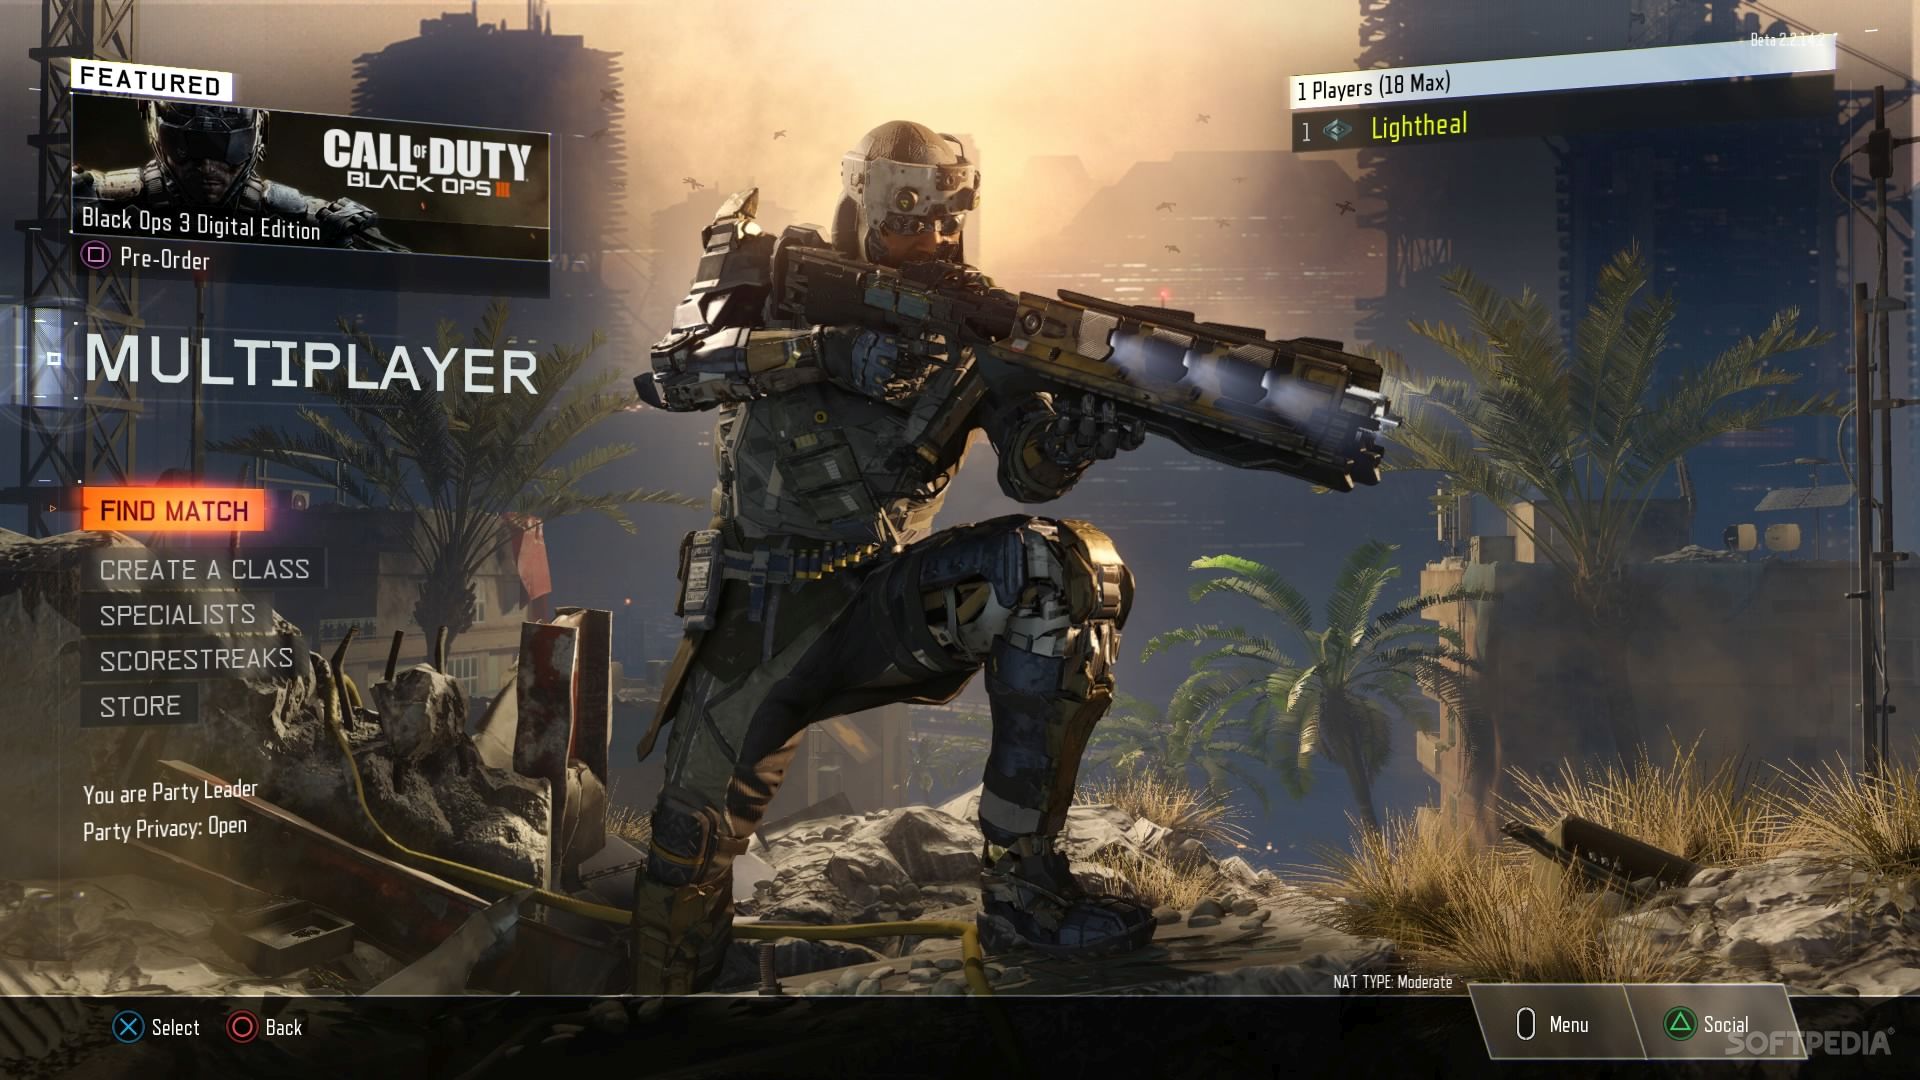 Call of Duty Black Ops 3 Xbox One Beta Code Issue Solved via 1920x1080